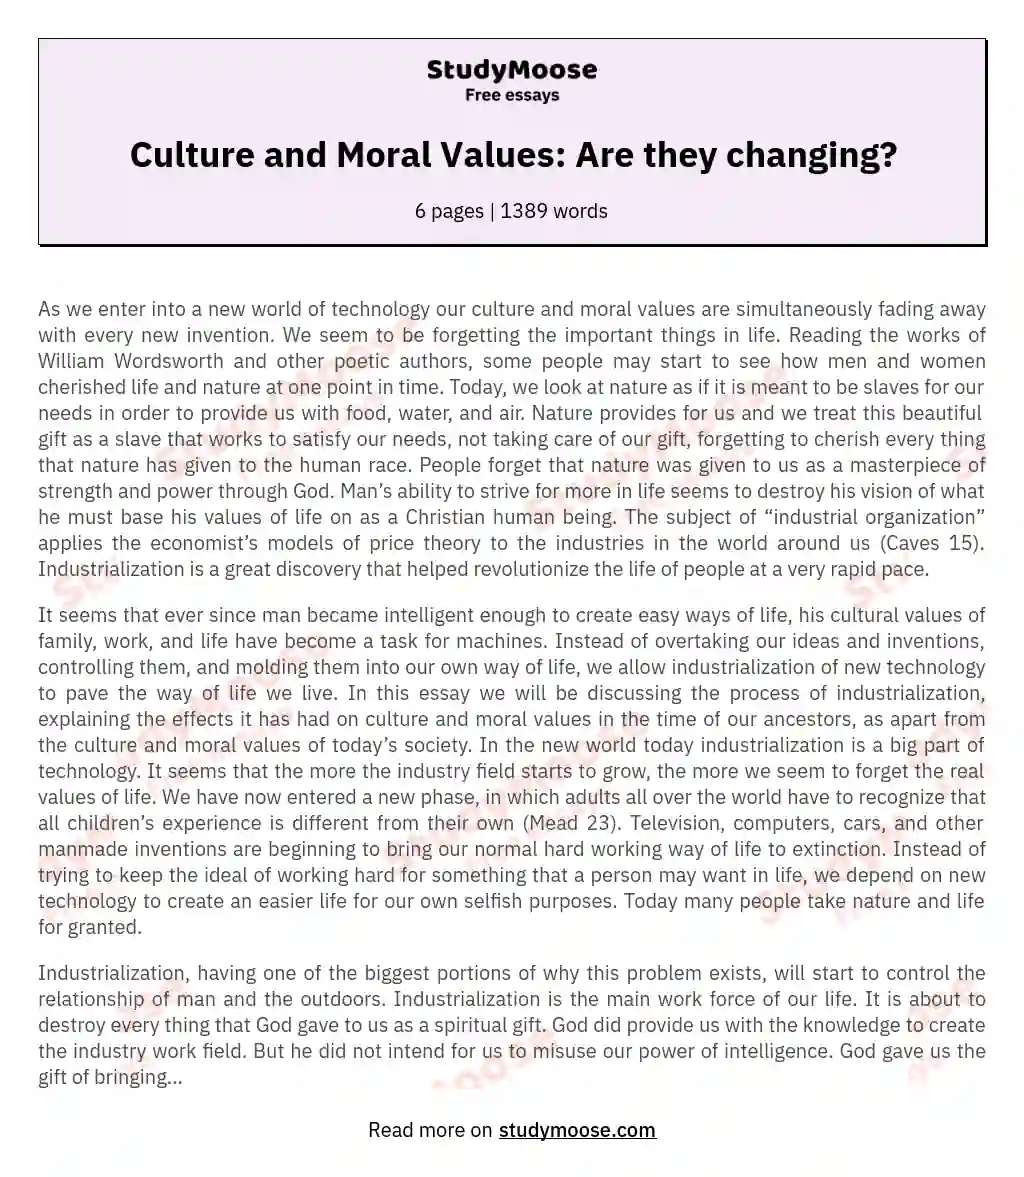 Culture and Moral Values: Are they changing?